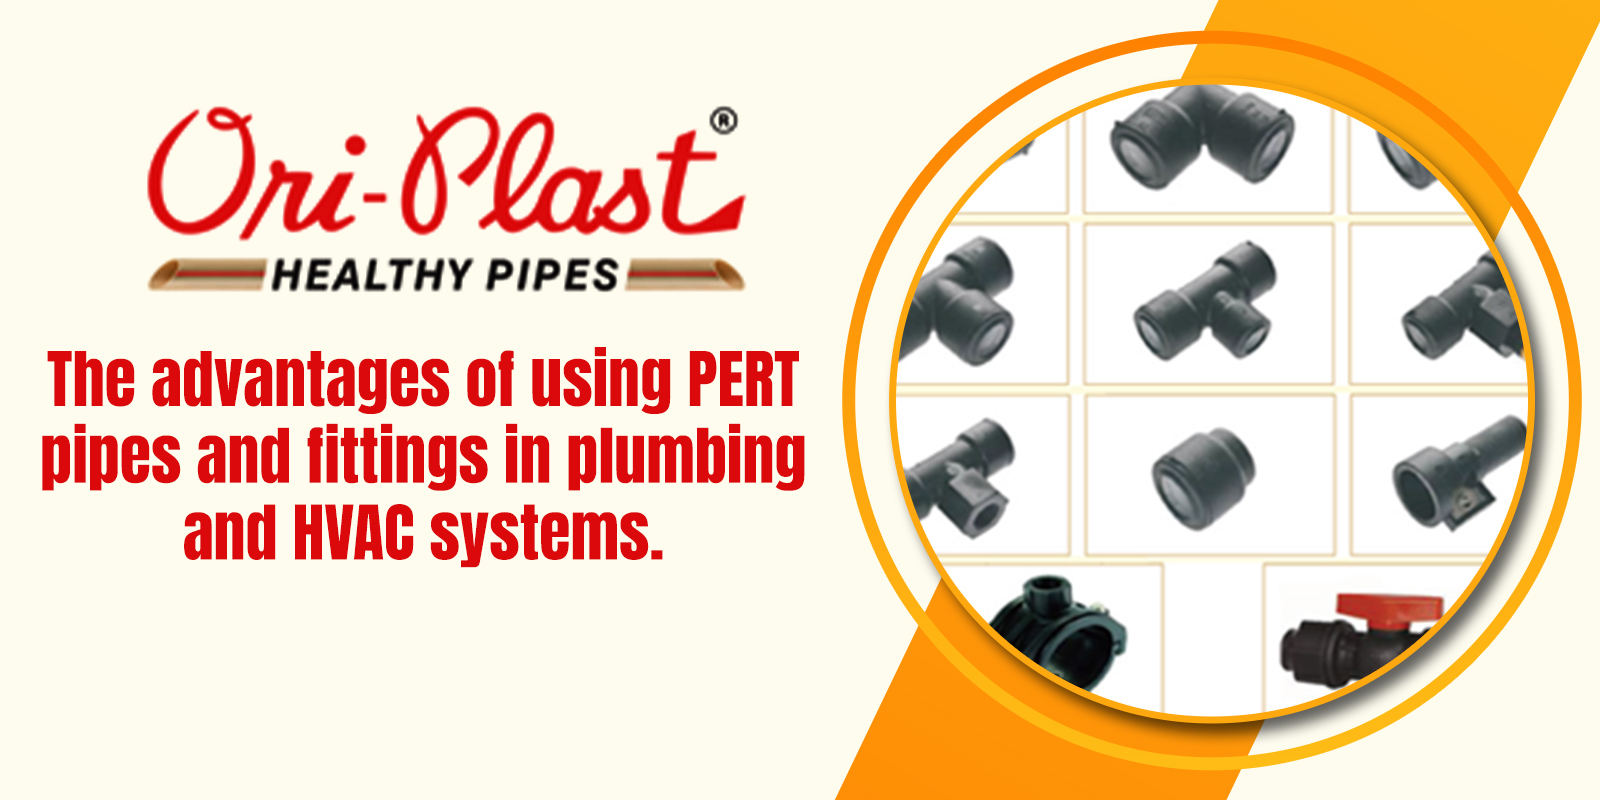 PE-RT pipes